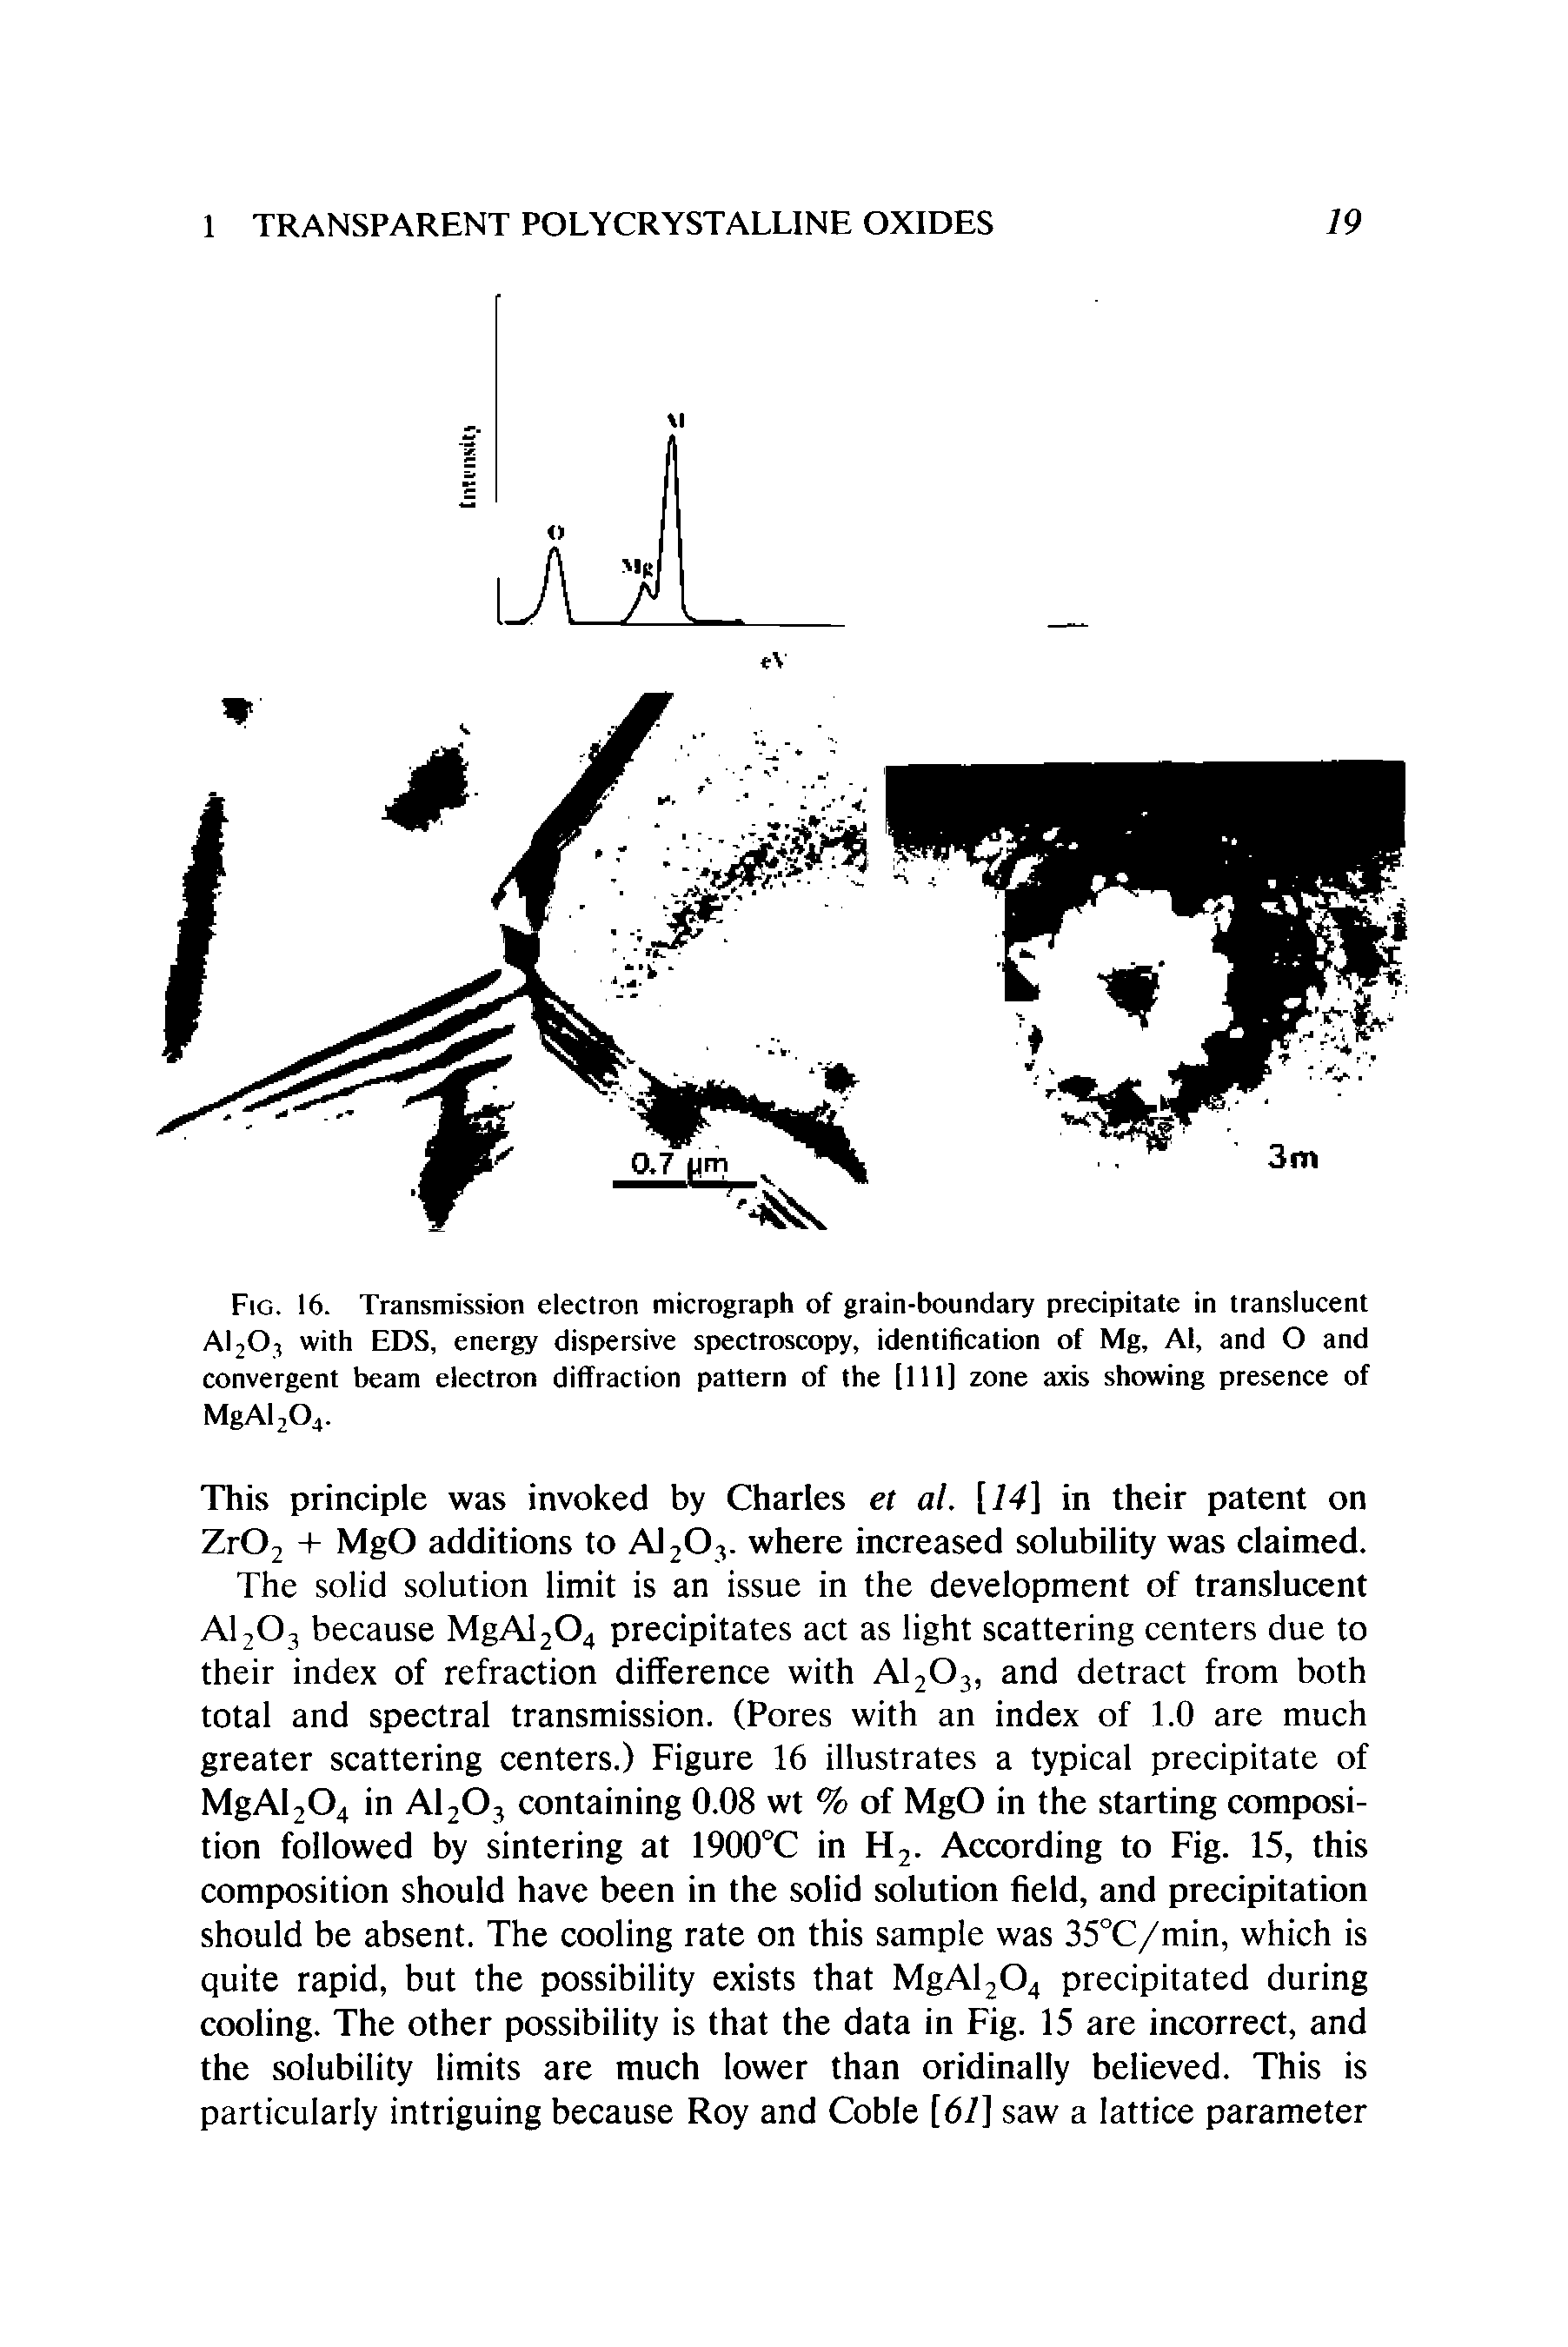 Fig. 16. Transmission electron micrograph of grain-boundary precipitate in translucent Al203 with EDS, energy dispersive spectroscopy, identification of Mg, Al, and O and convergent beam electron diffraction pattern of the [111] zone axis showing presence of MgAl204.